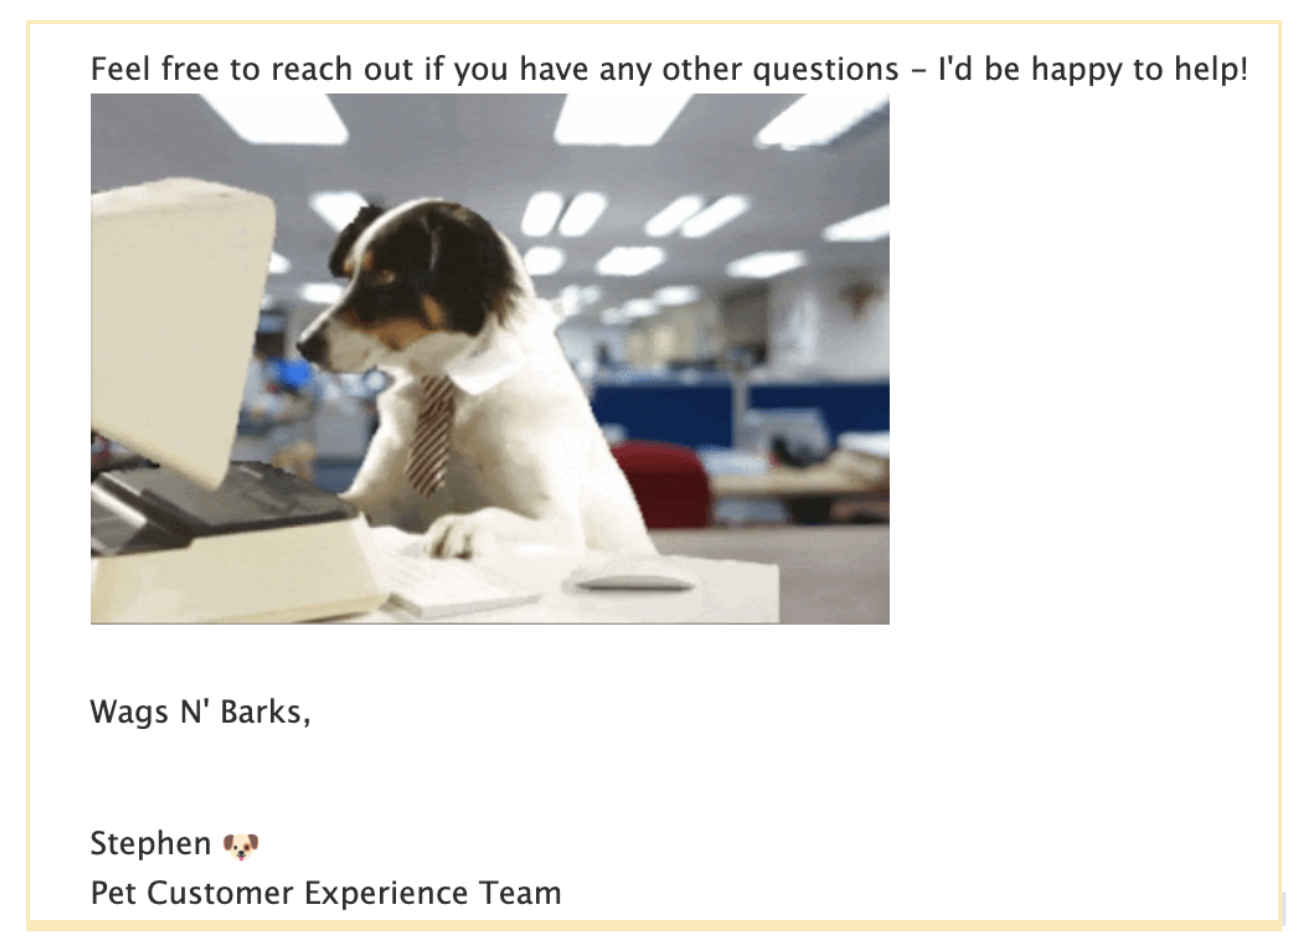 Email salutation copy with an image of a dog at a computer with a tie on.